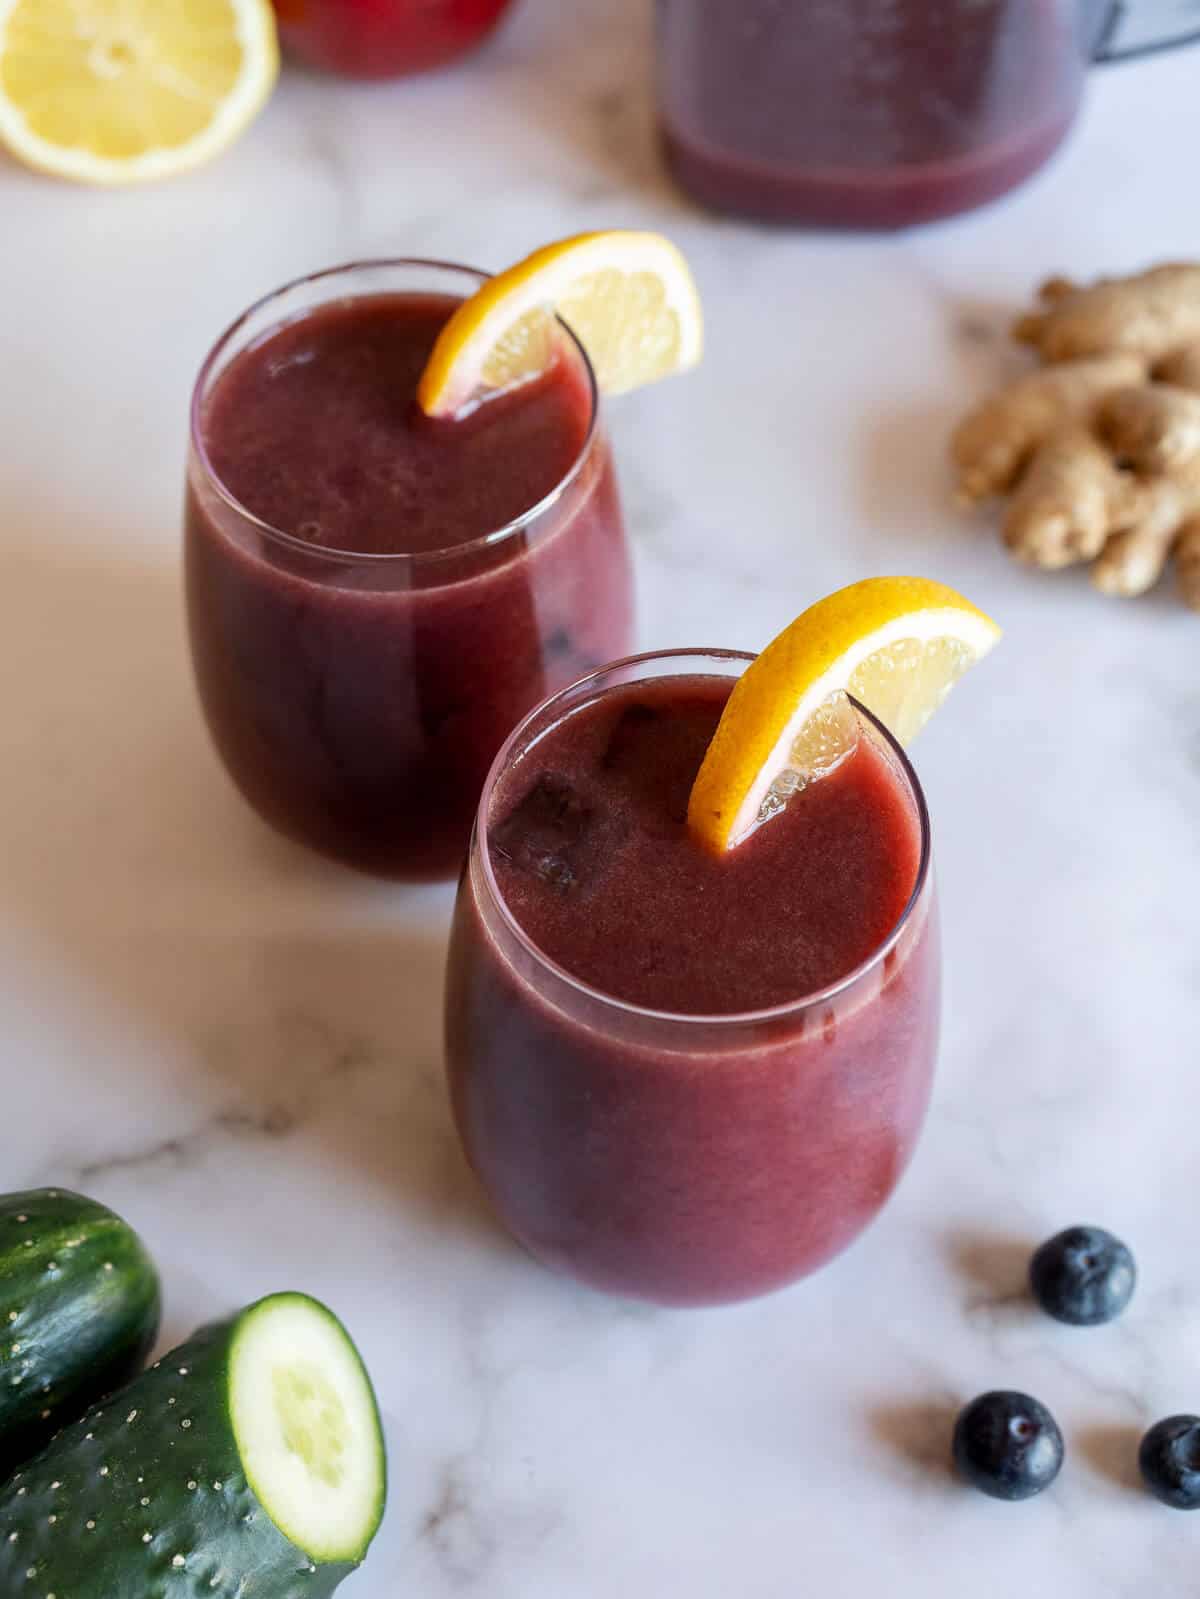 two glasses of organic blueberry juice with a lemon wedge.